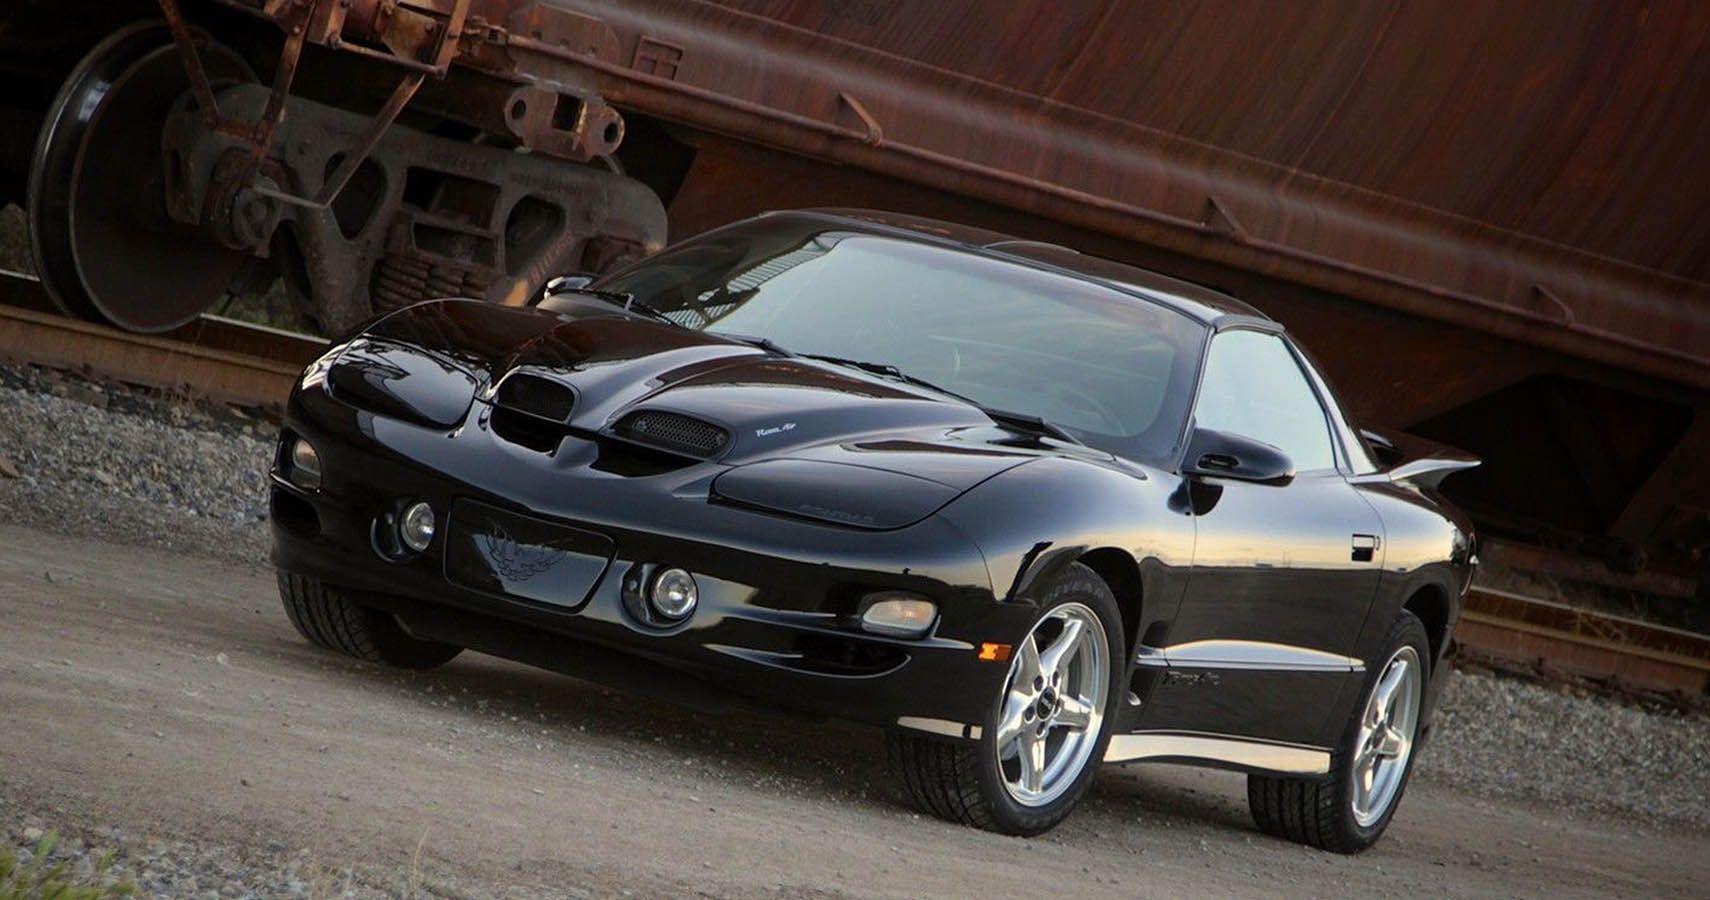 In 1978 Pontiac Trans Am Introduced The WS6 Special Performance Package, After The Car’s Big-Screen Appearance In Smokey And The Bandit